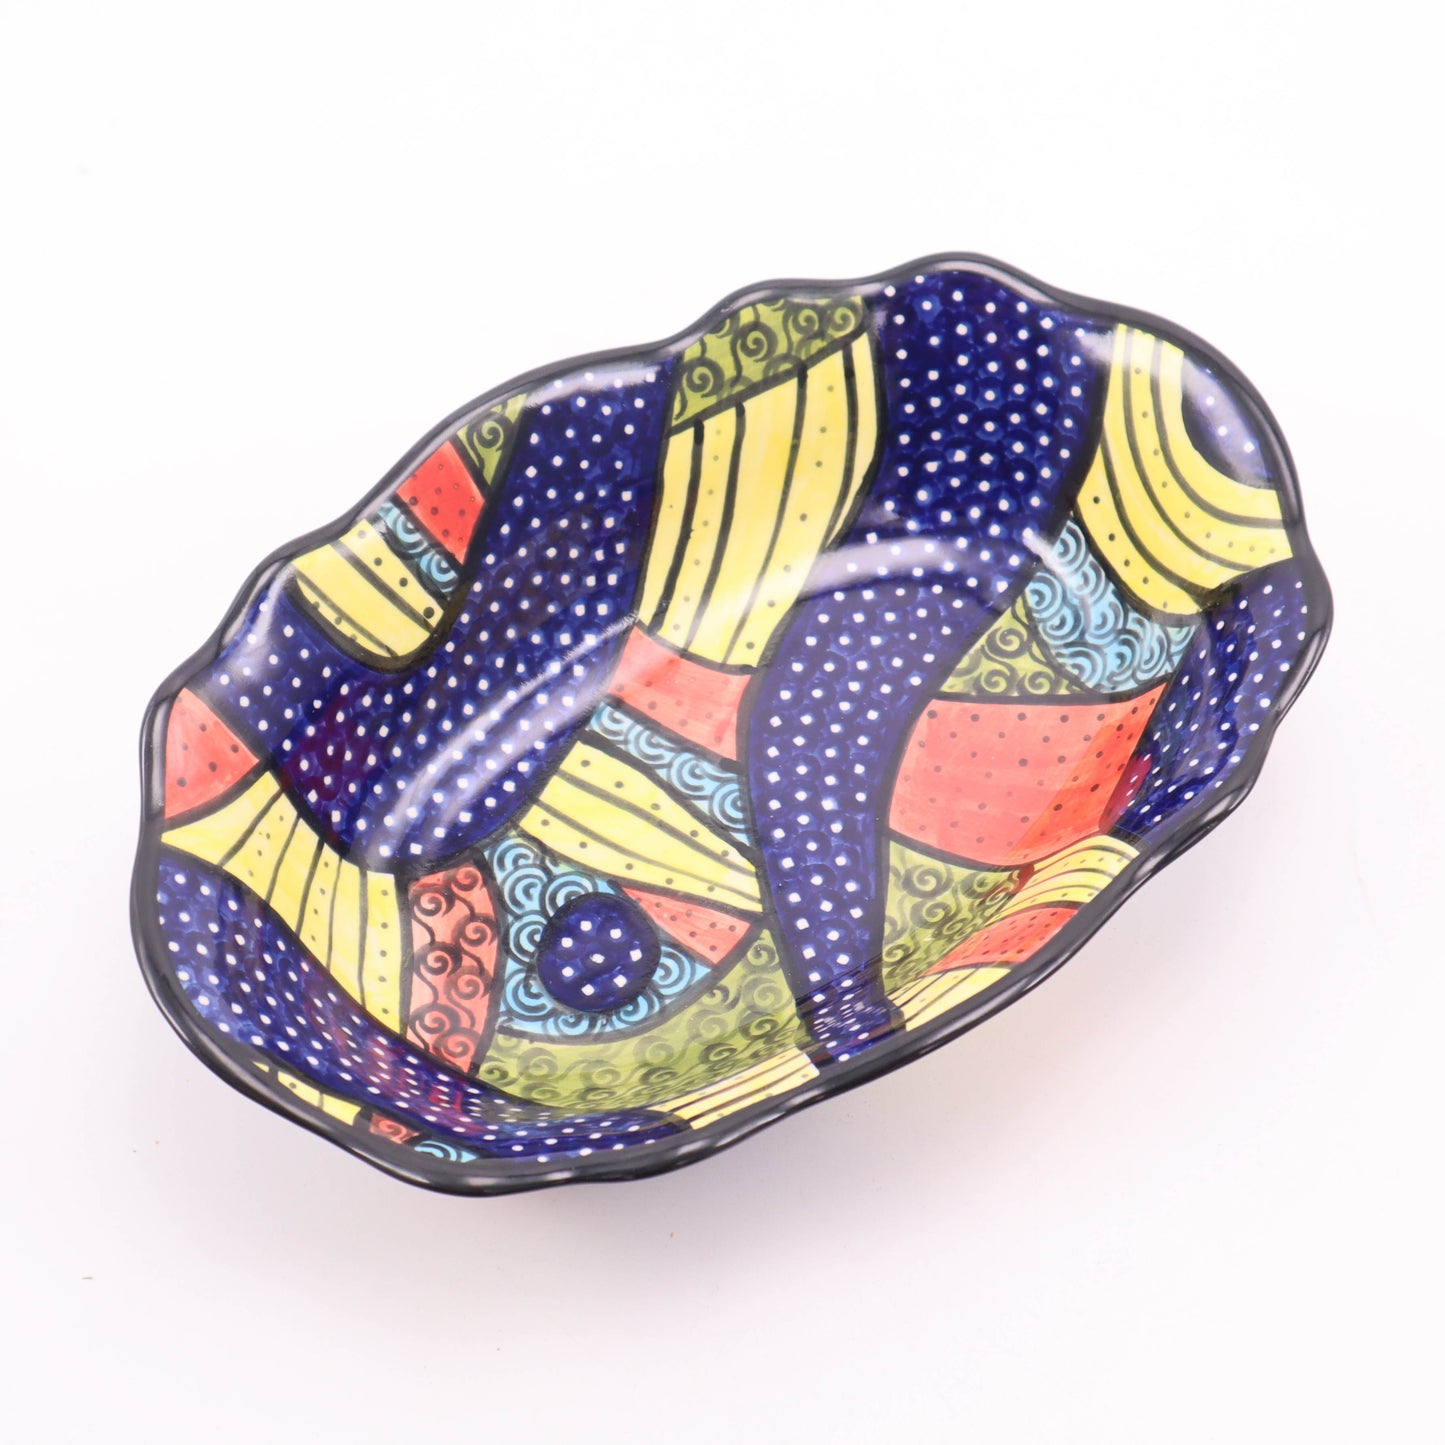 10"x7" Waved Oval Bowl. Pattern: Abstract